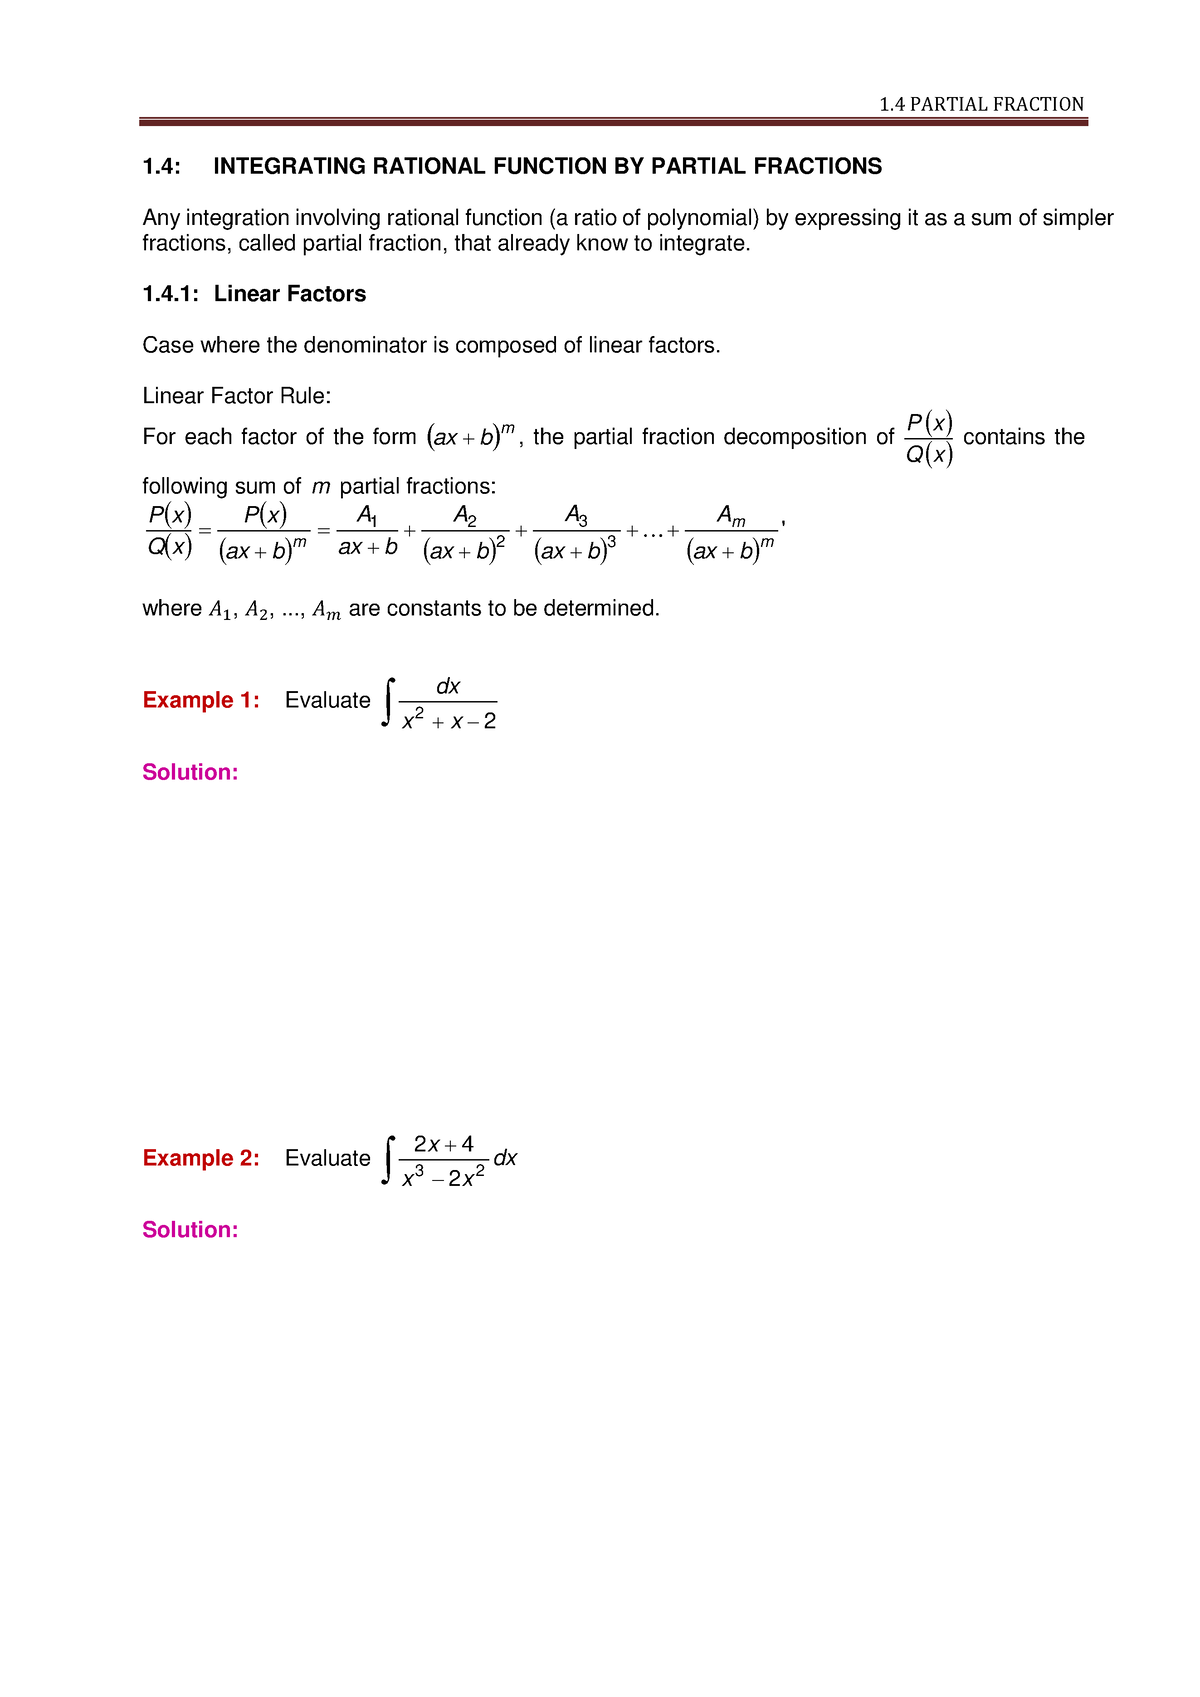 mat435-chapter-1-partial-fraction-1-partial-fraction-1-integrating